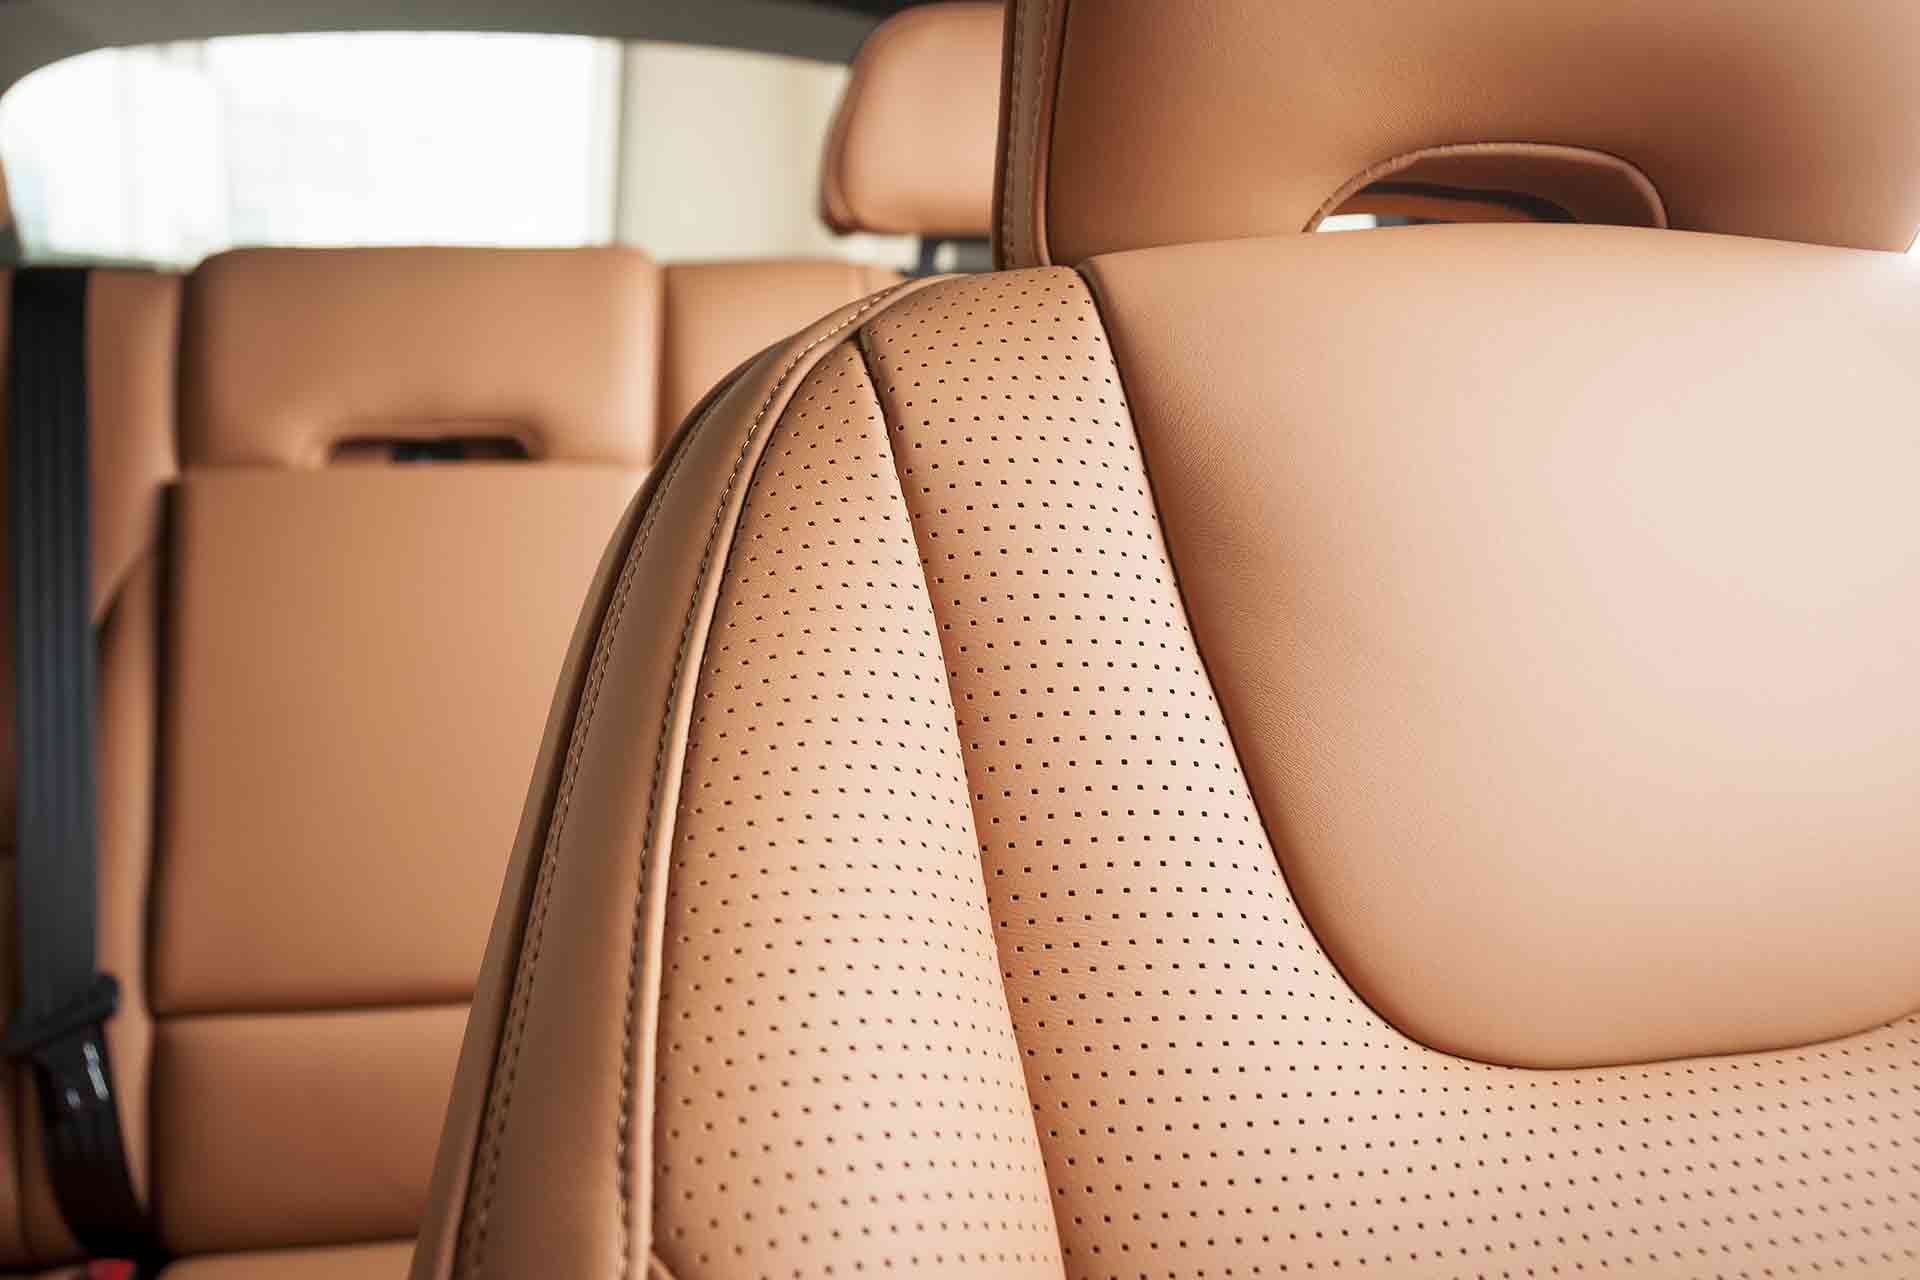 How to Clean Leather Car Seats